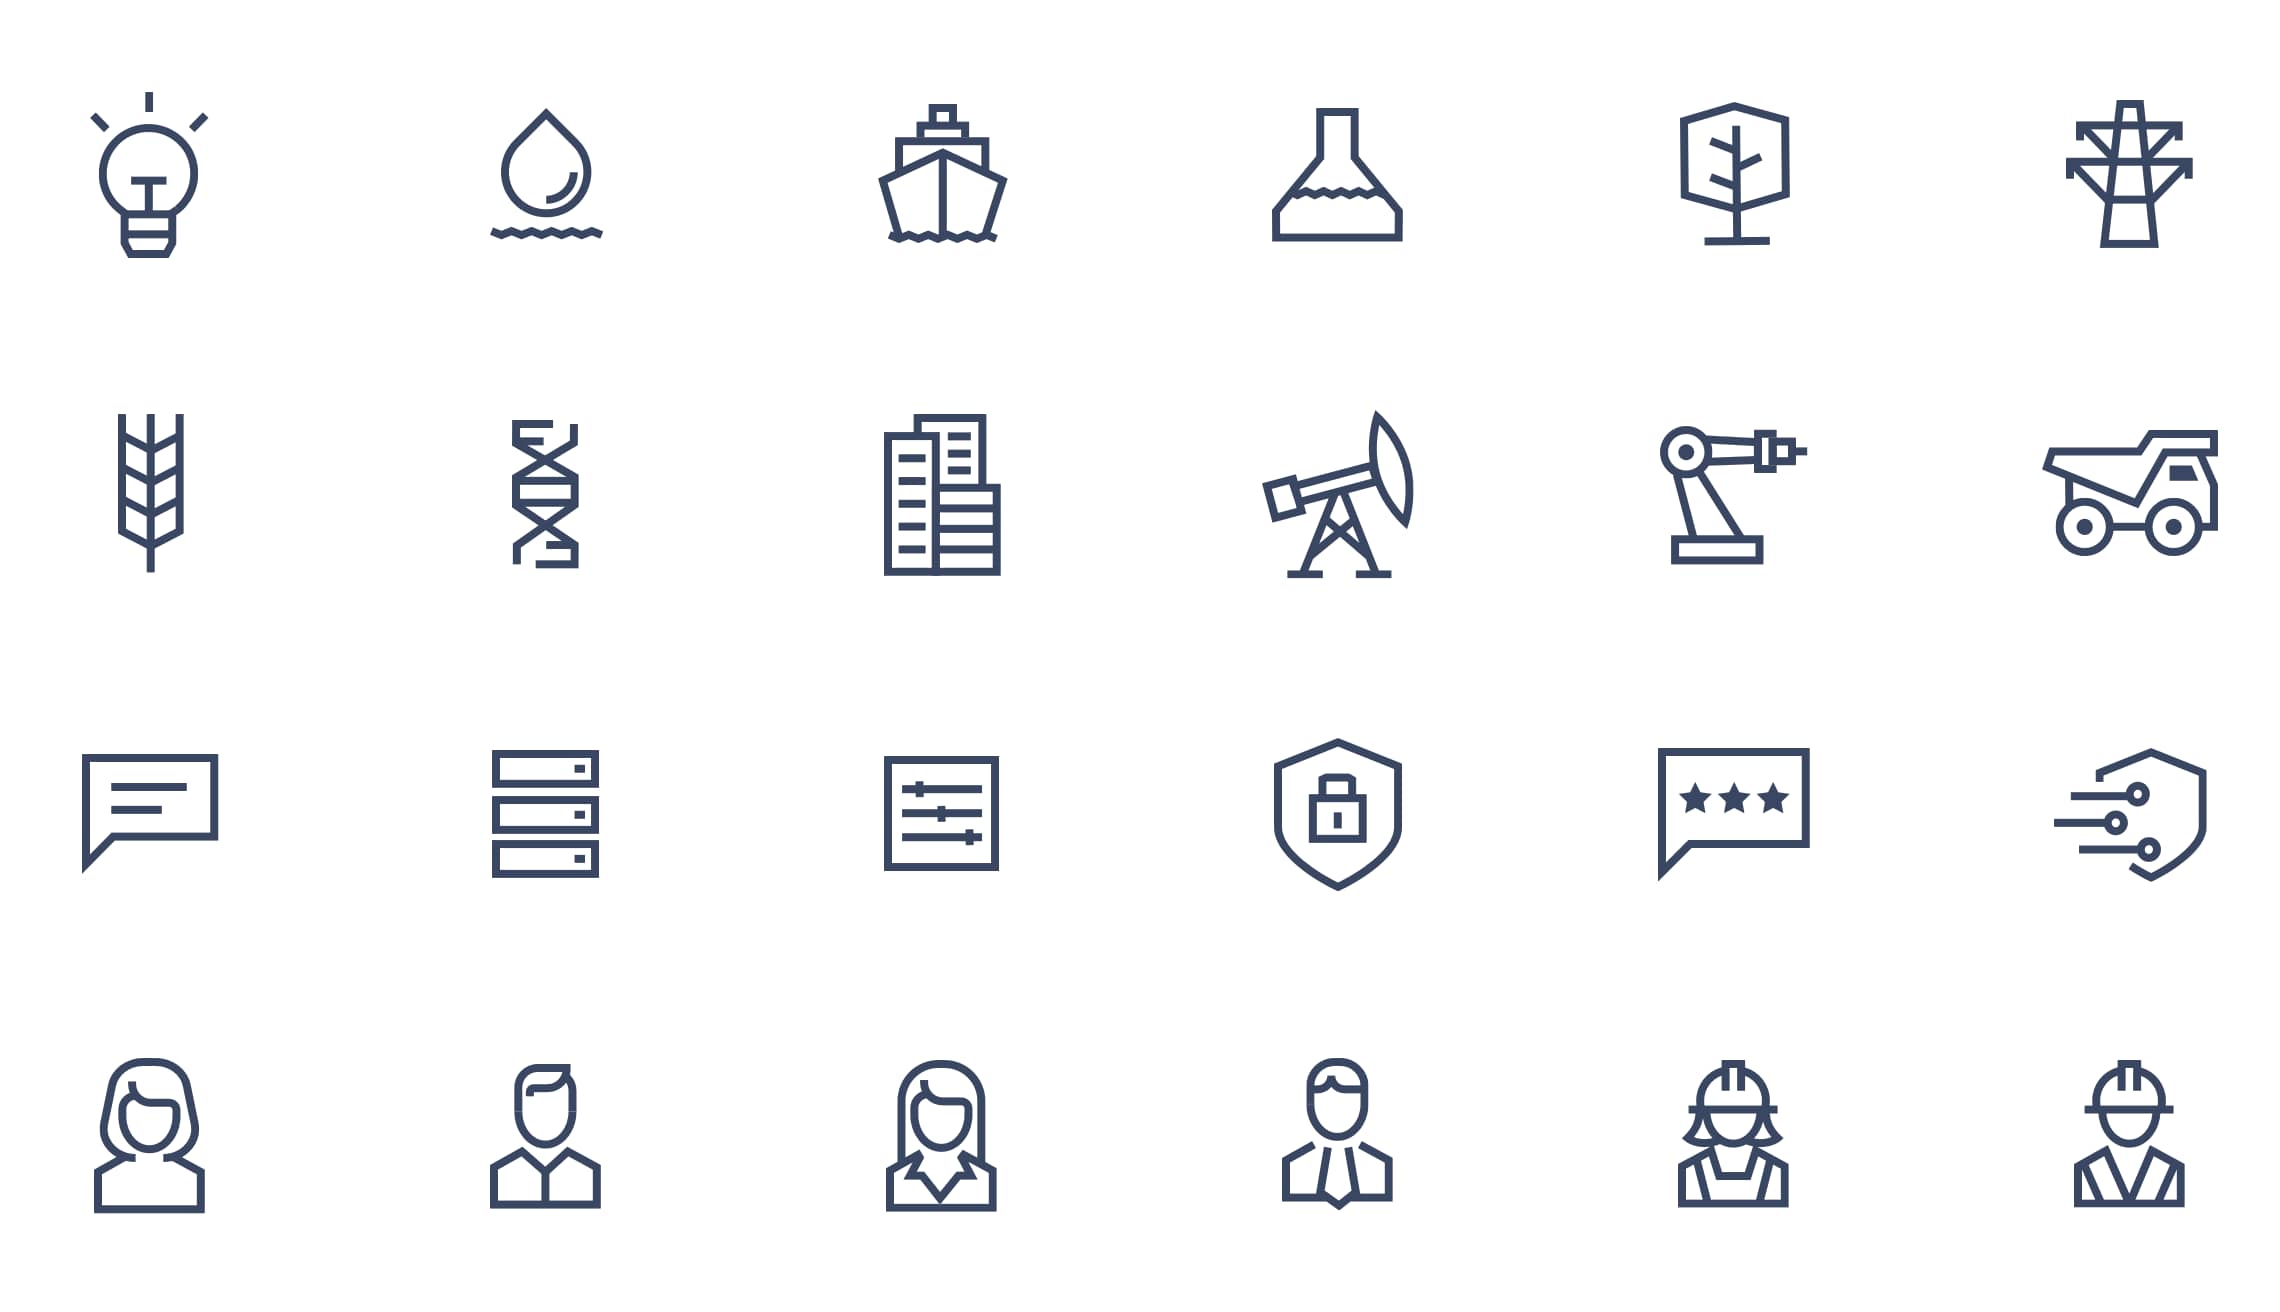 A variety of icons created for OSIsoft